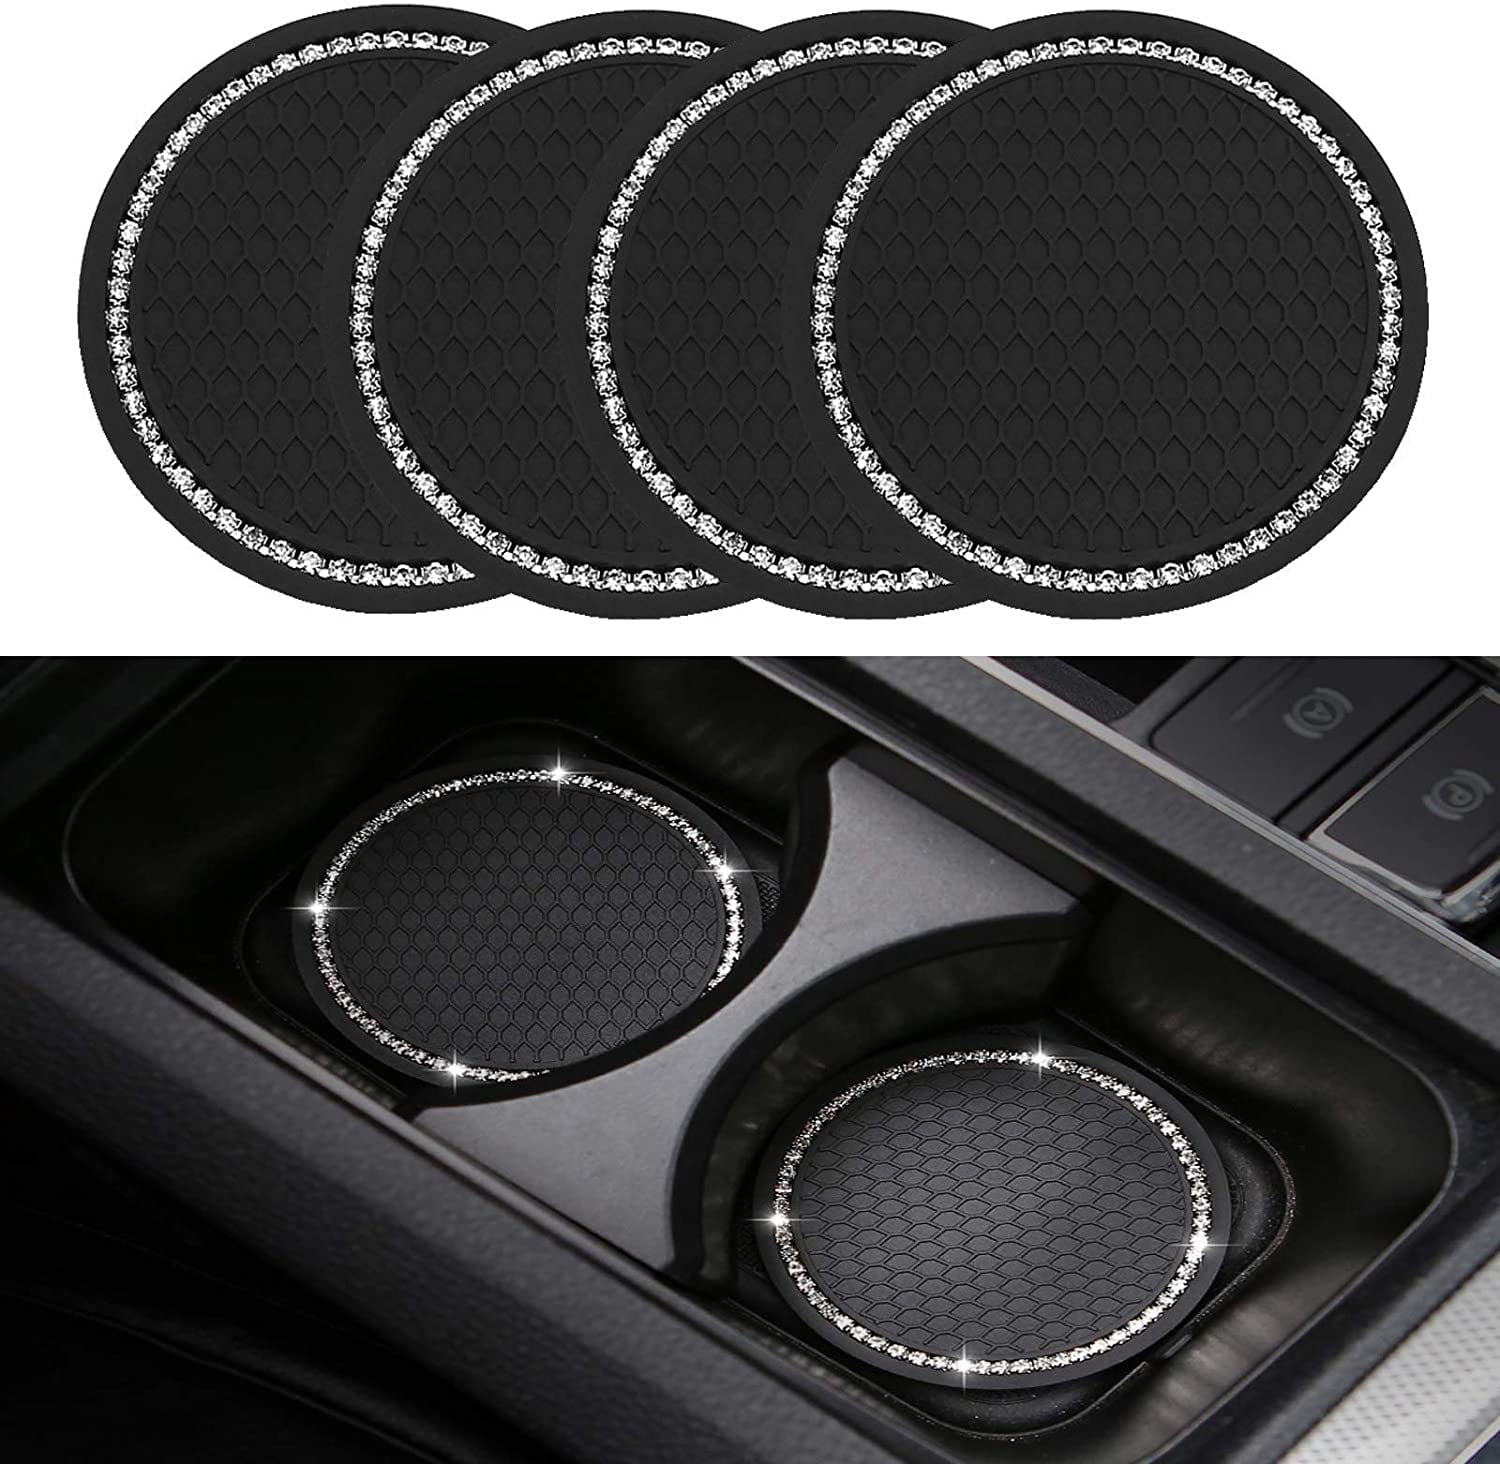 4 Pack Bling Car Cup Holder Coaster 2.75 Inch Soft Bling Crystal Rhinestone Rubber Pad Set Black Round Auto Cup Holder Insert Drink Coaster Car Interior Accessories